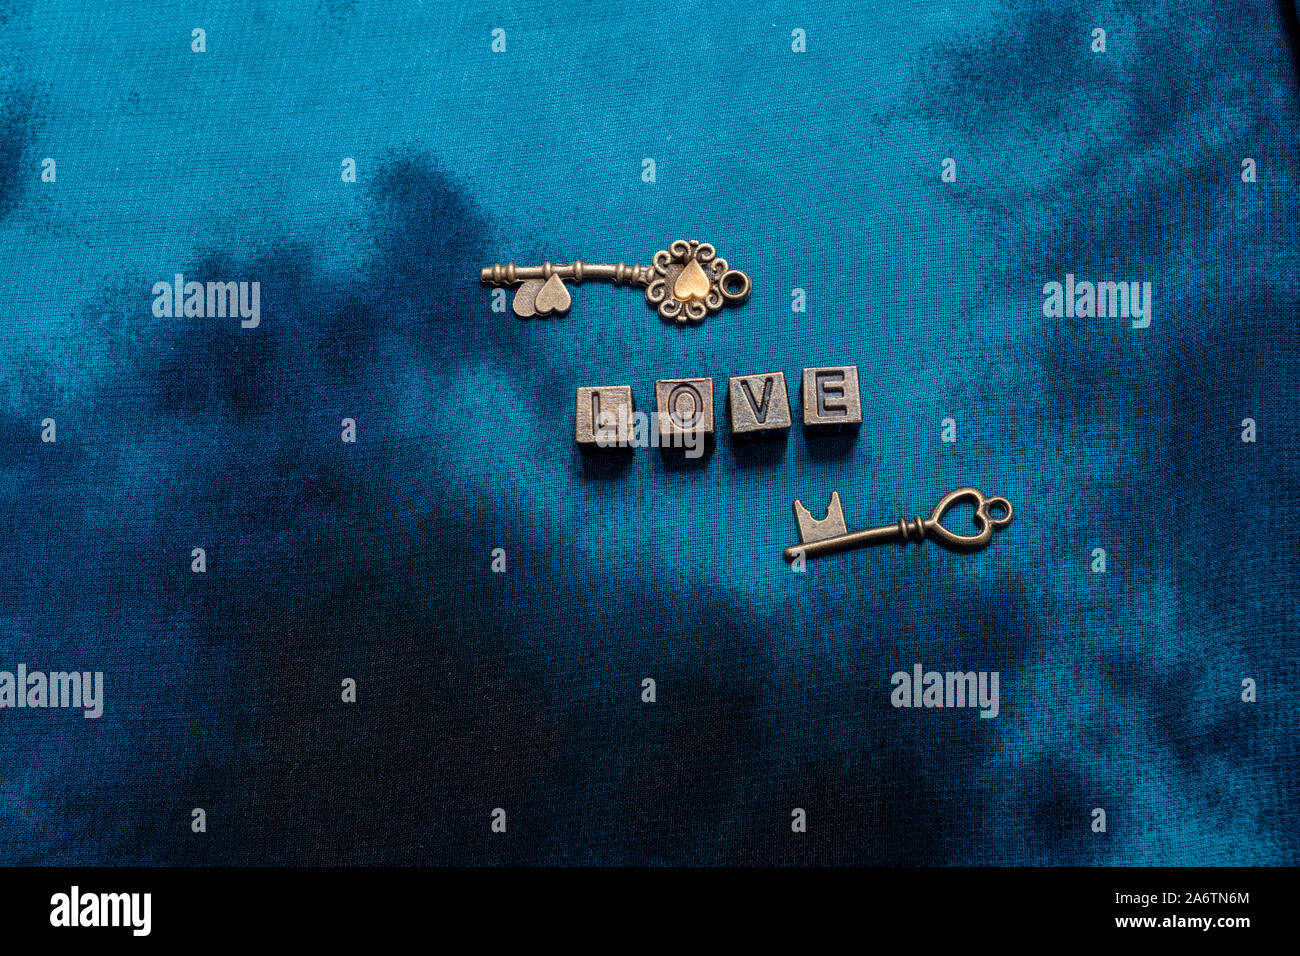 Ornamental keys around the Love wording with retro metal letters Stock Photo